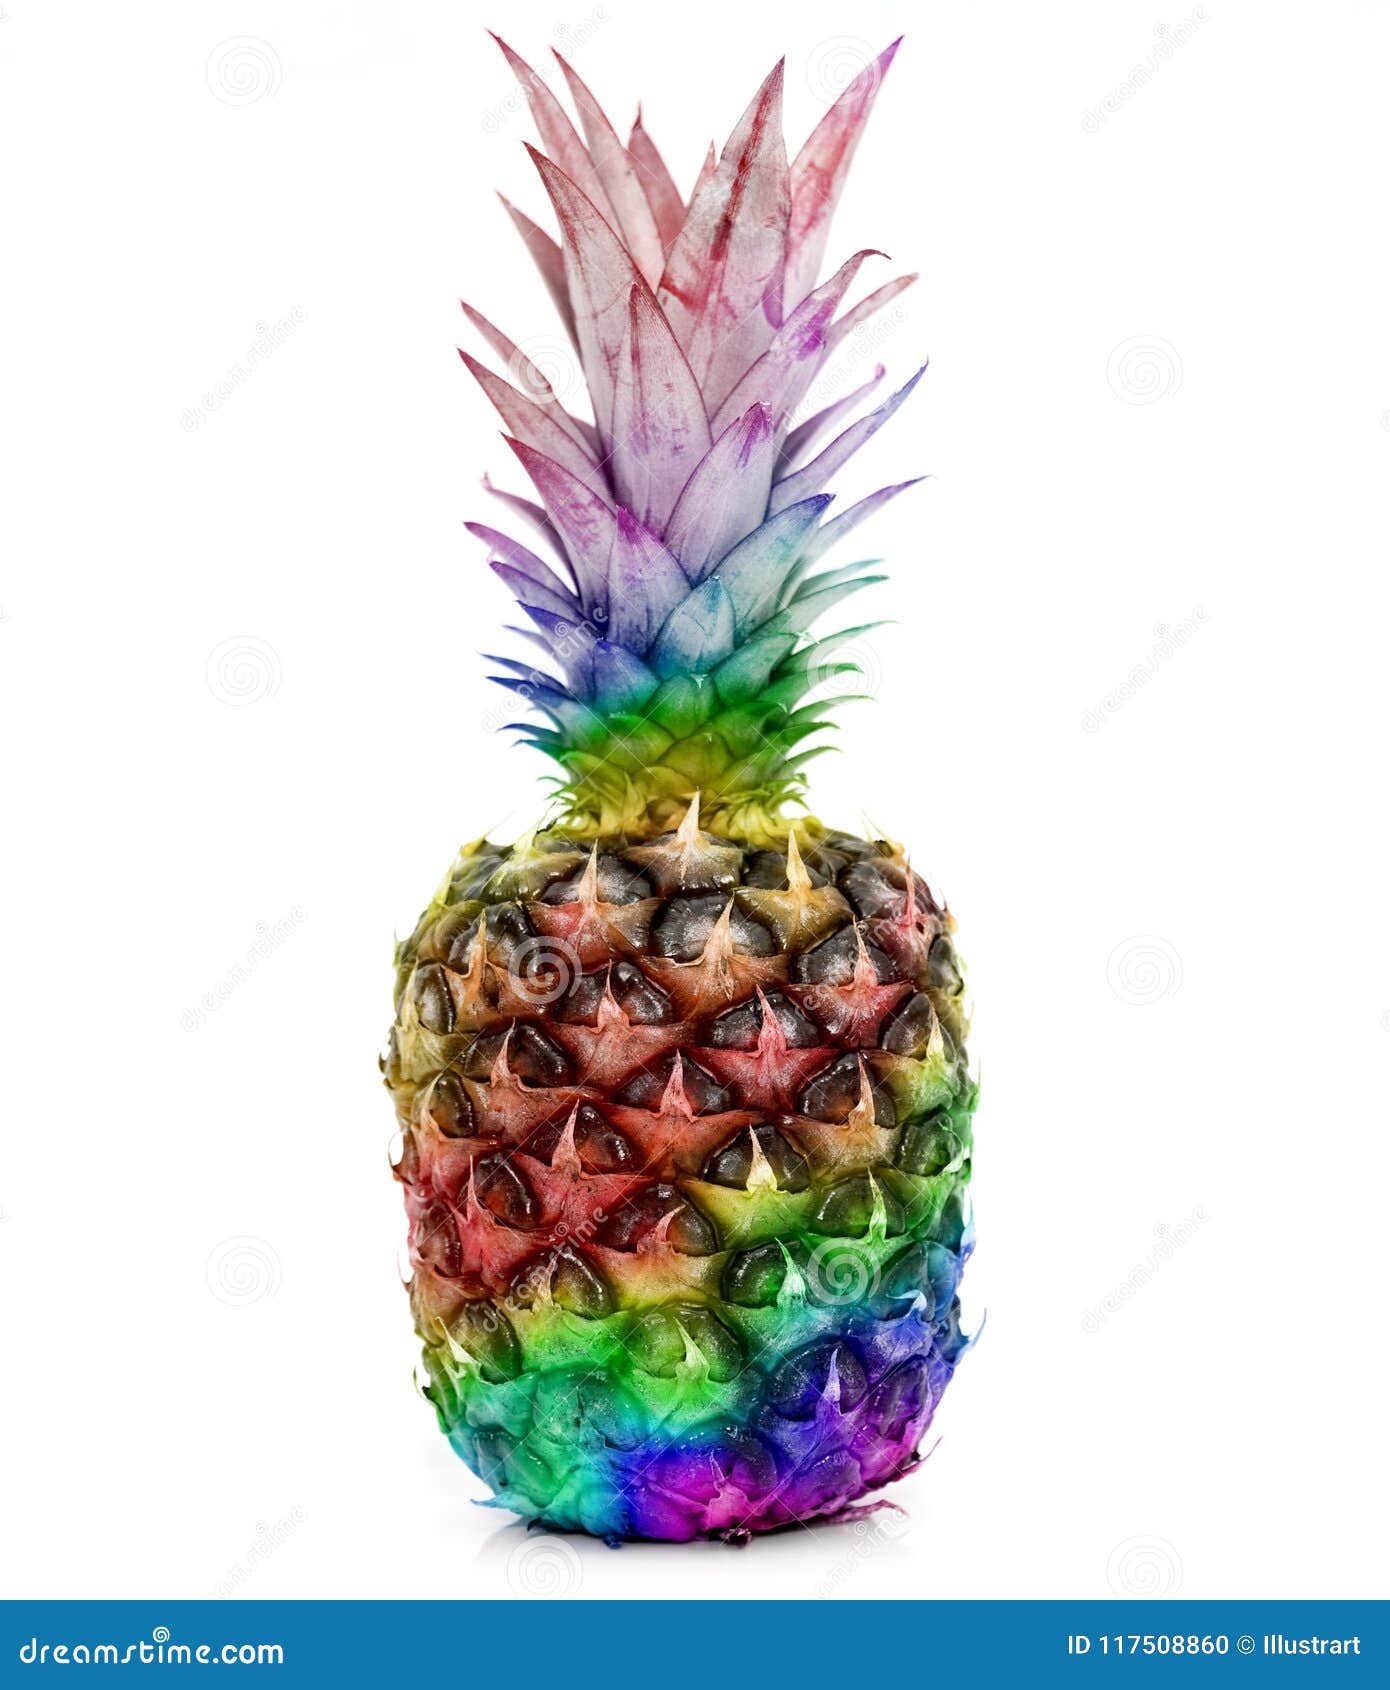 Colored pineapple stock photo. Image of healthy, egzotic - 117508860